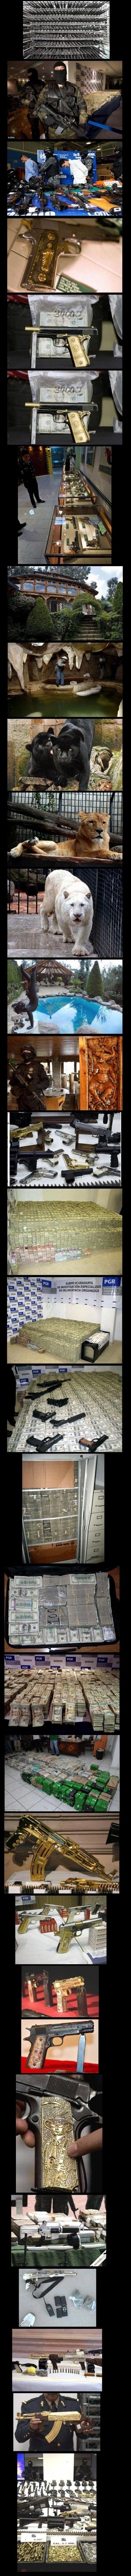 how rich is a drug lord you say?!. .. Apparently not rich enough to buy a descent security system, OH YEAH.